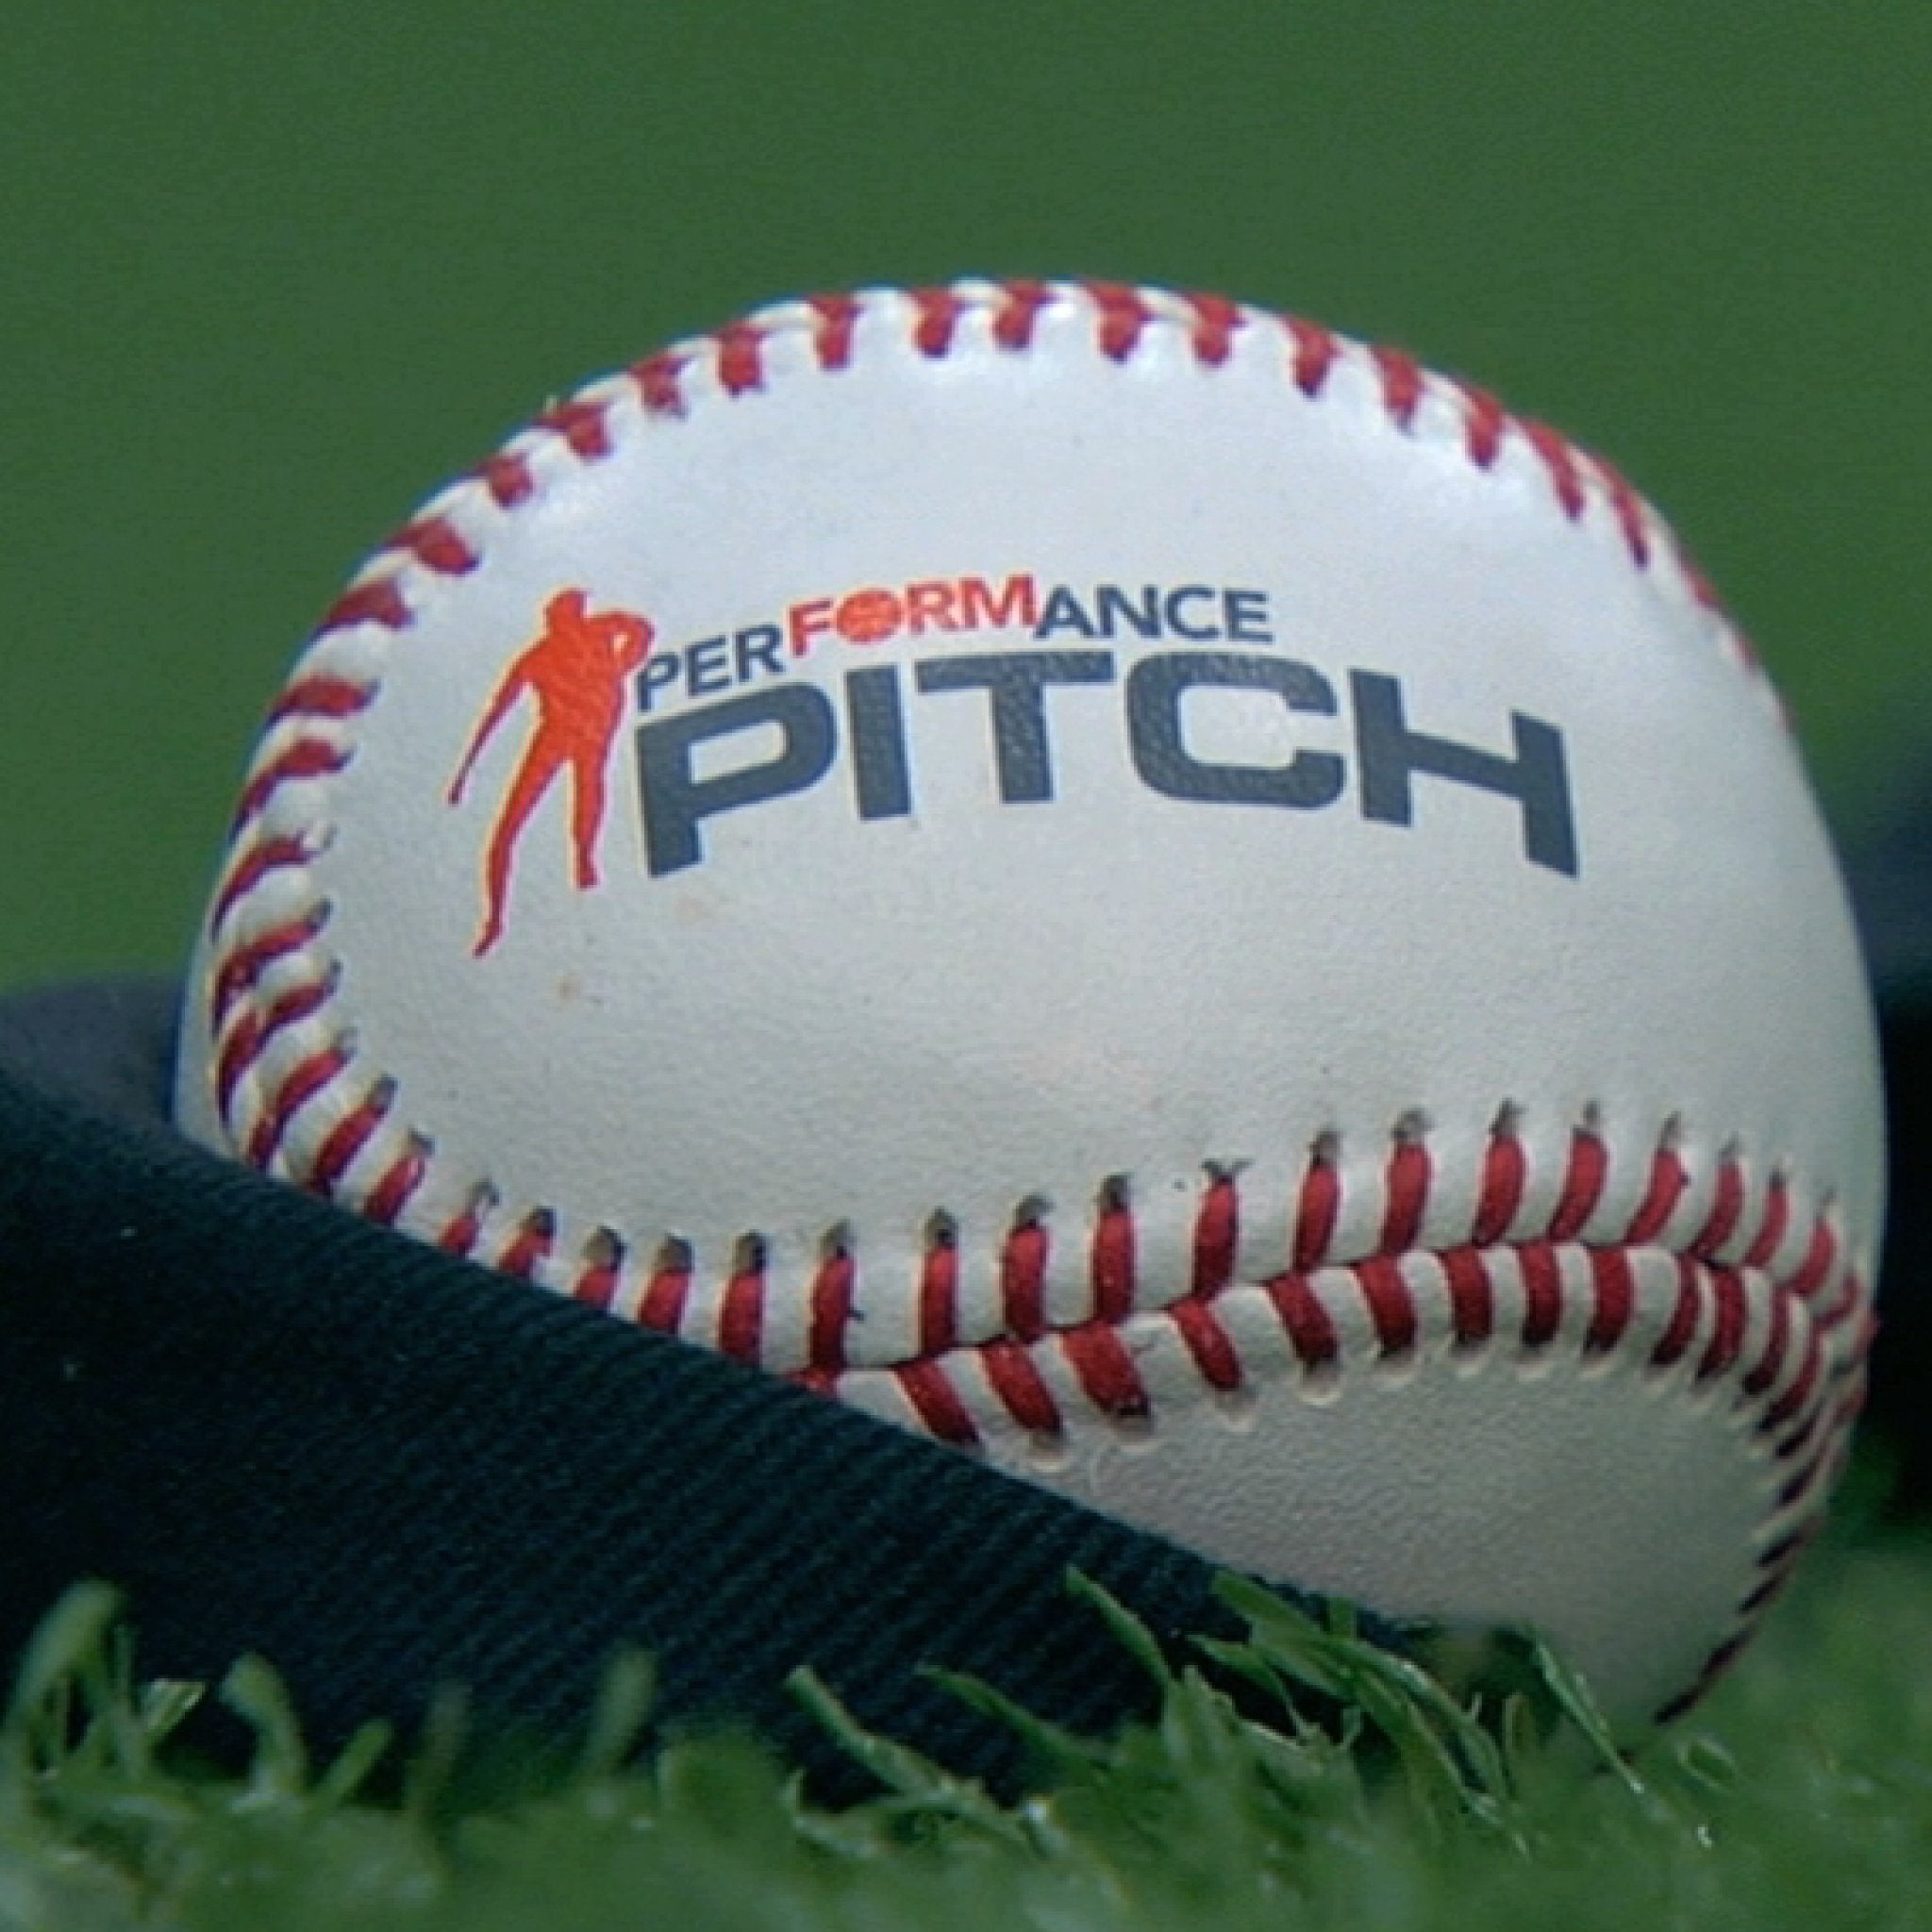 Pitch Training Baseball with Detailed Grip Instructions